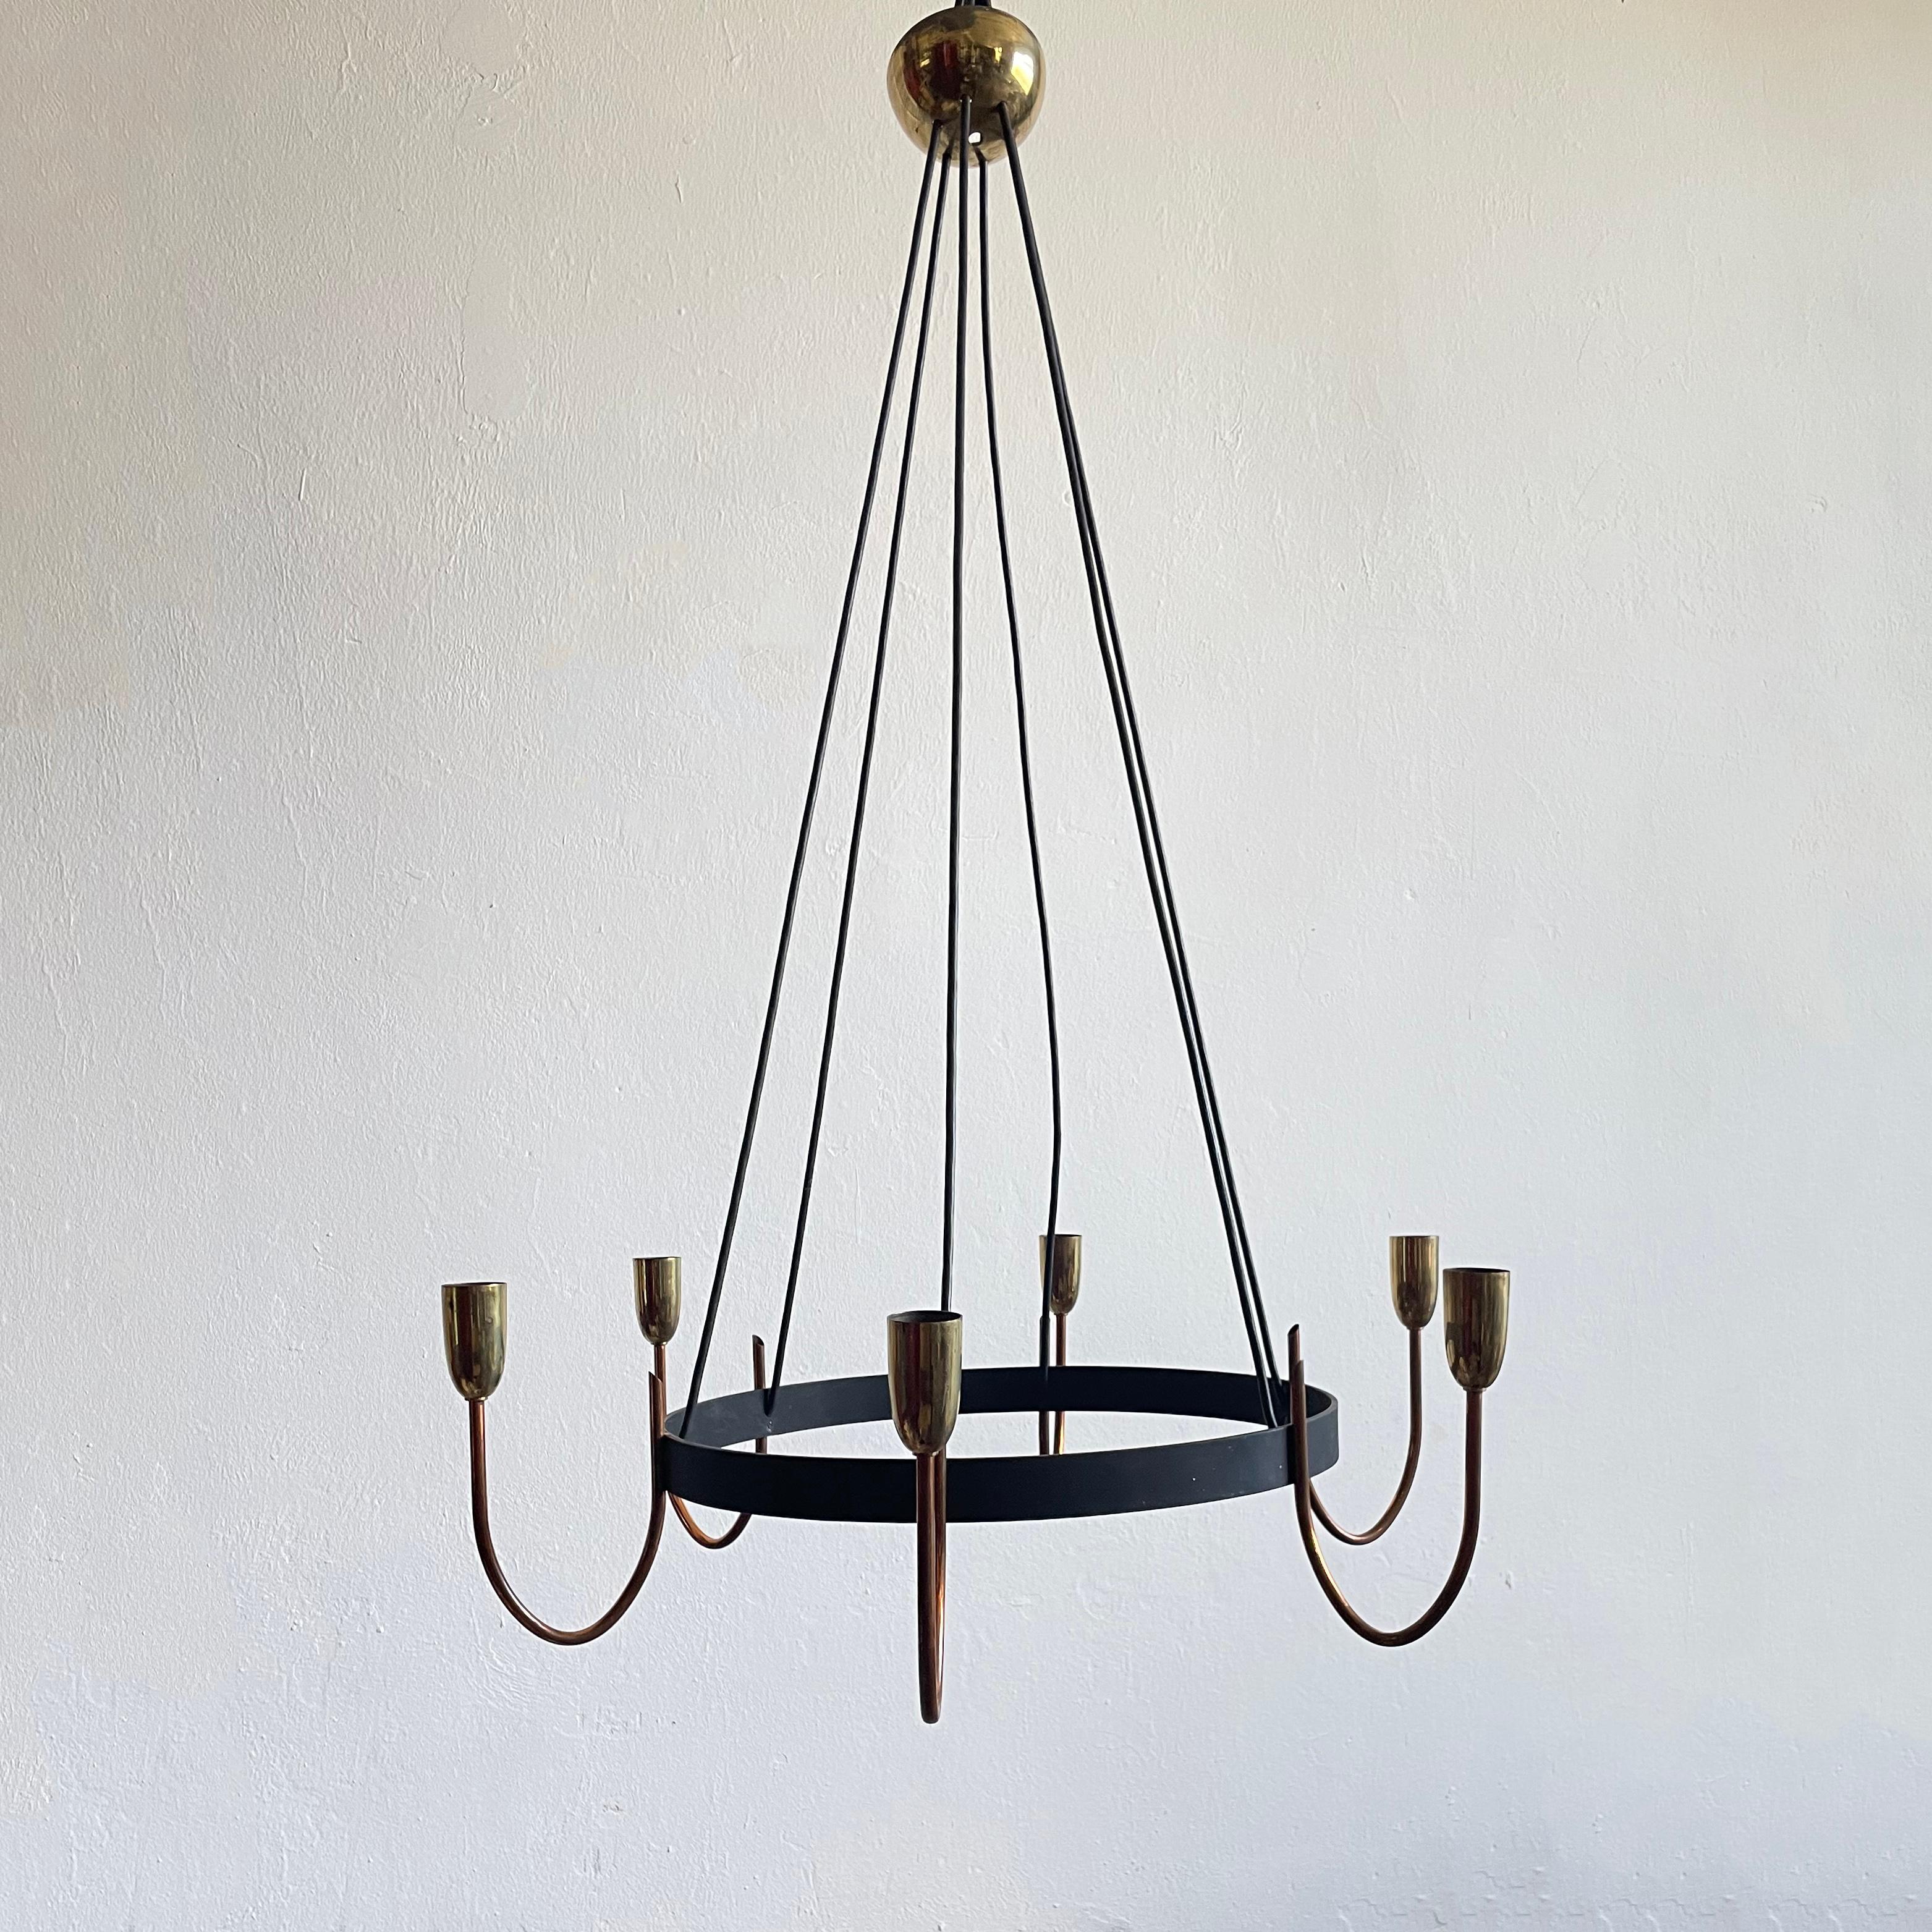 Large Austrian metal chandelier manufactured in the 1930s - 1940s in Art Deco style with modernist features

6x E27 lamp socket

Total height is adjustable to the maximum length of 150 cm

The chandelier is in good vintage condition and in